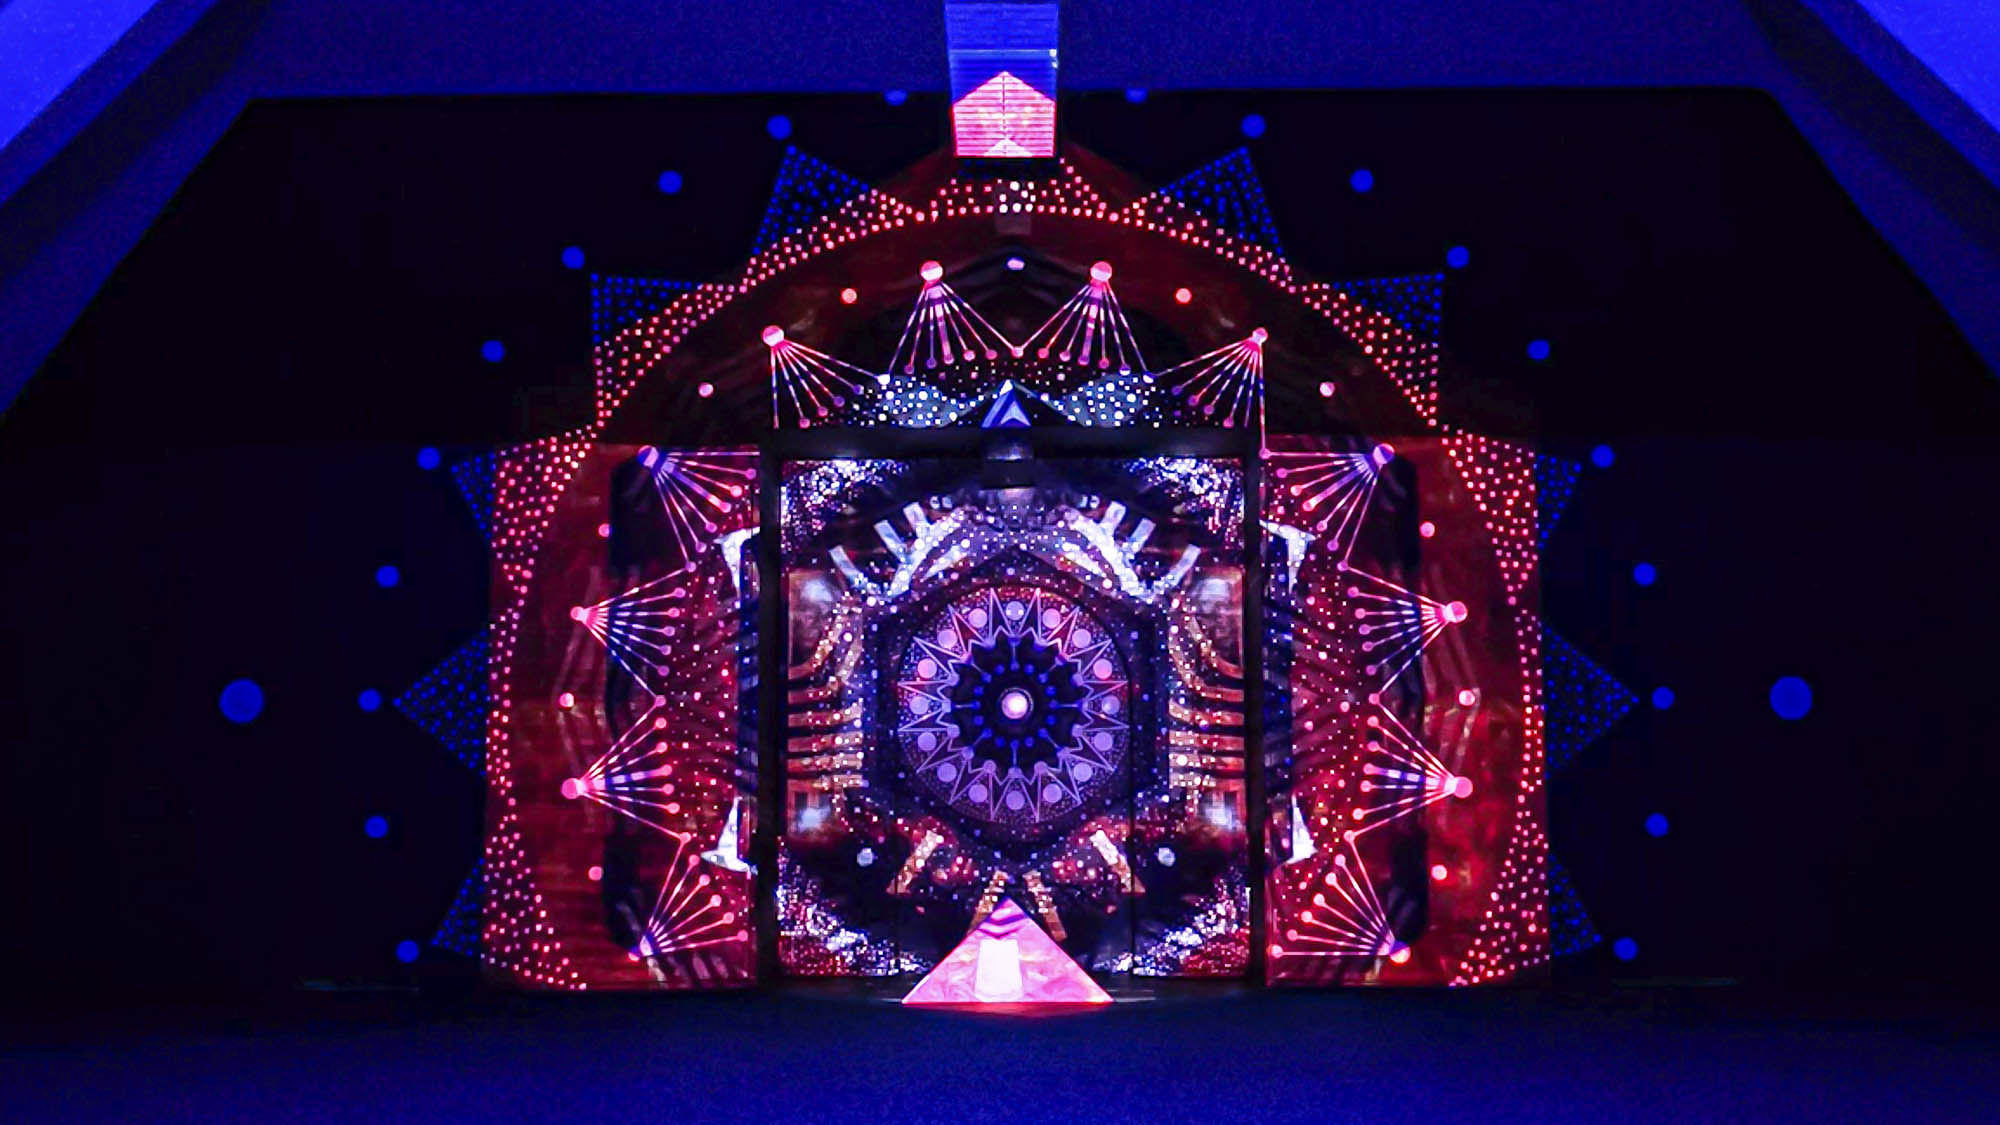 Image of a video art installation combined with a mural painting. Mandala geometric design with projection mapping art. Light artist philipp frank